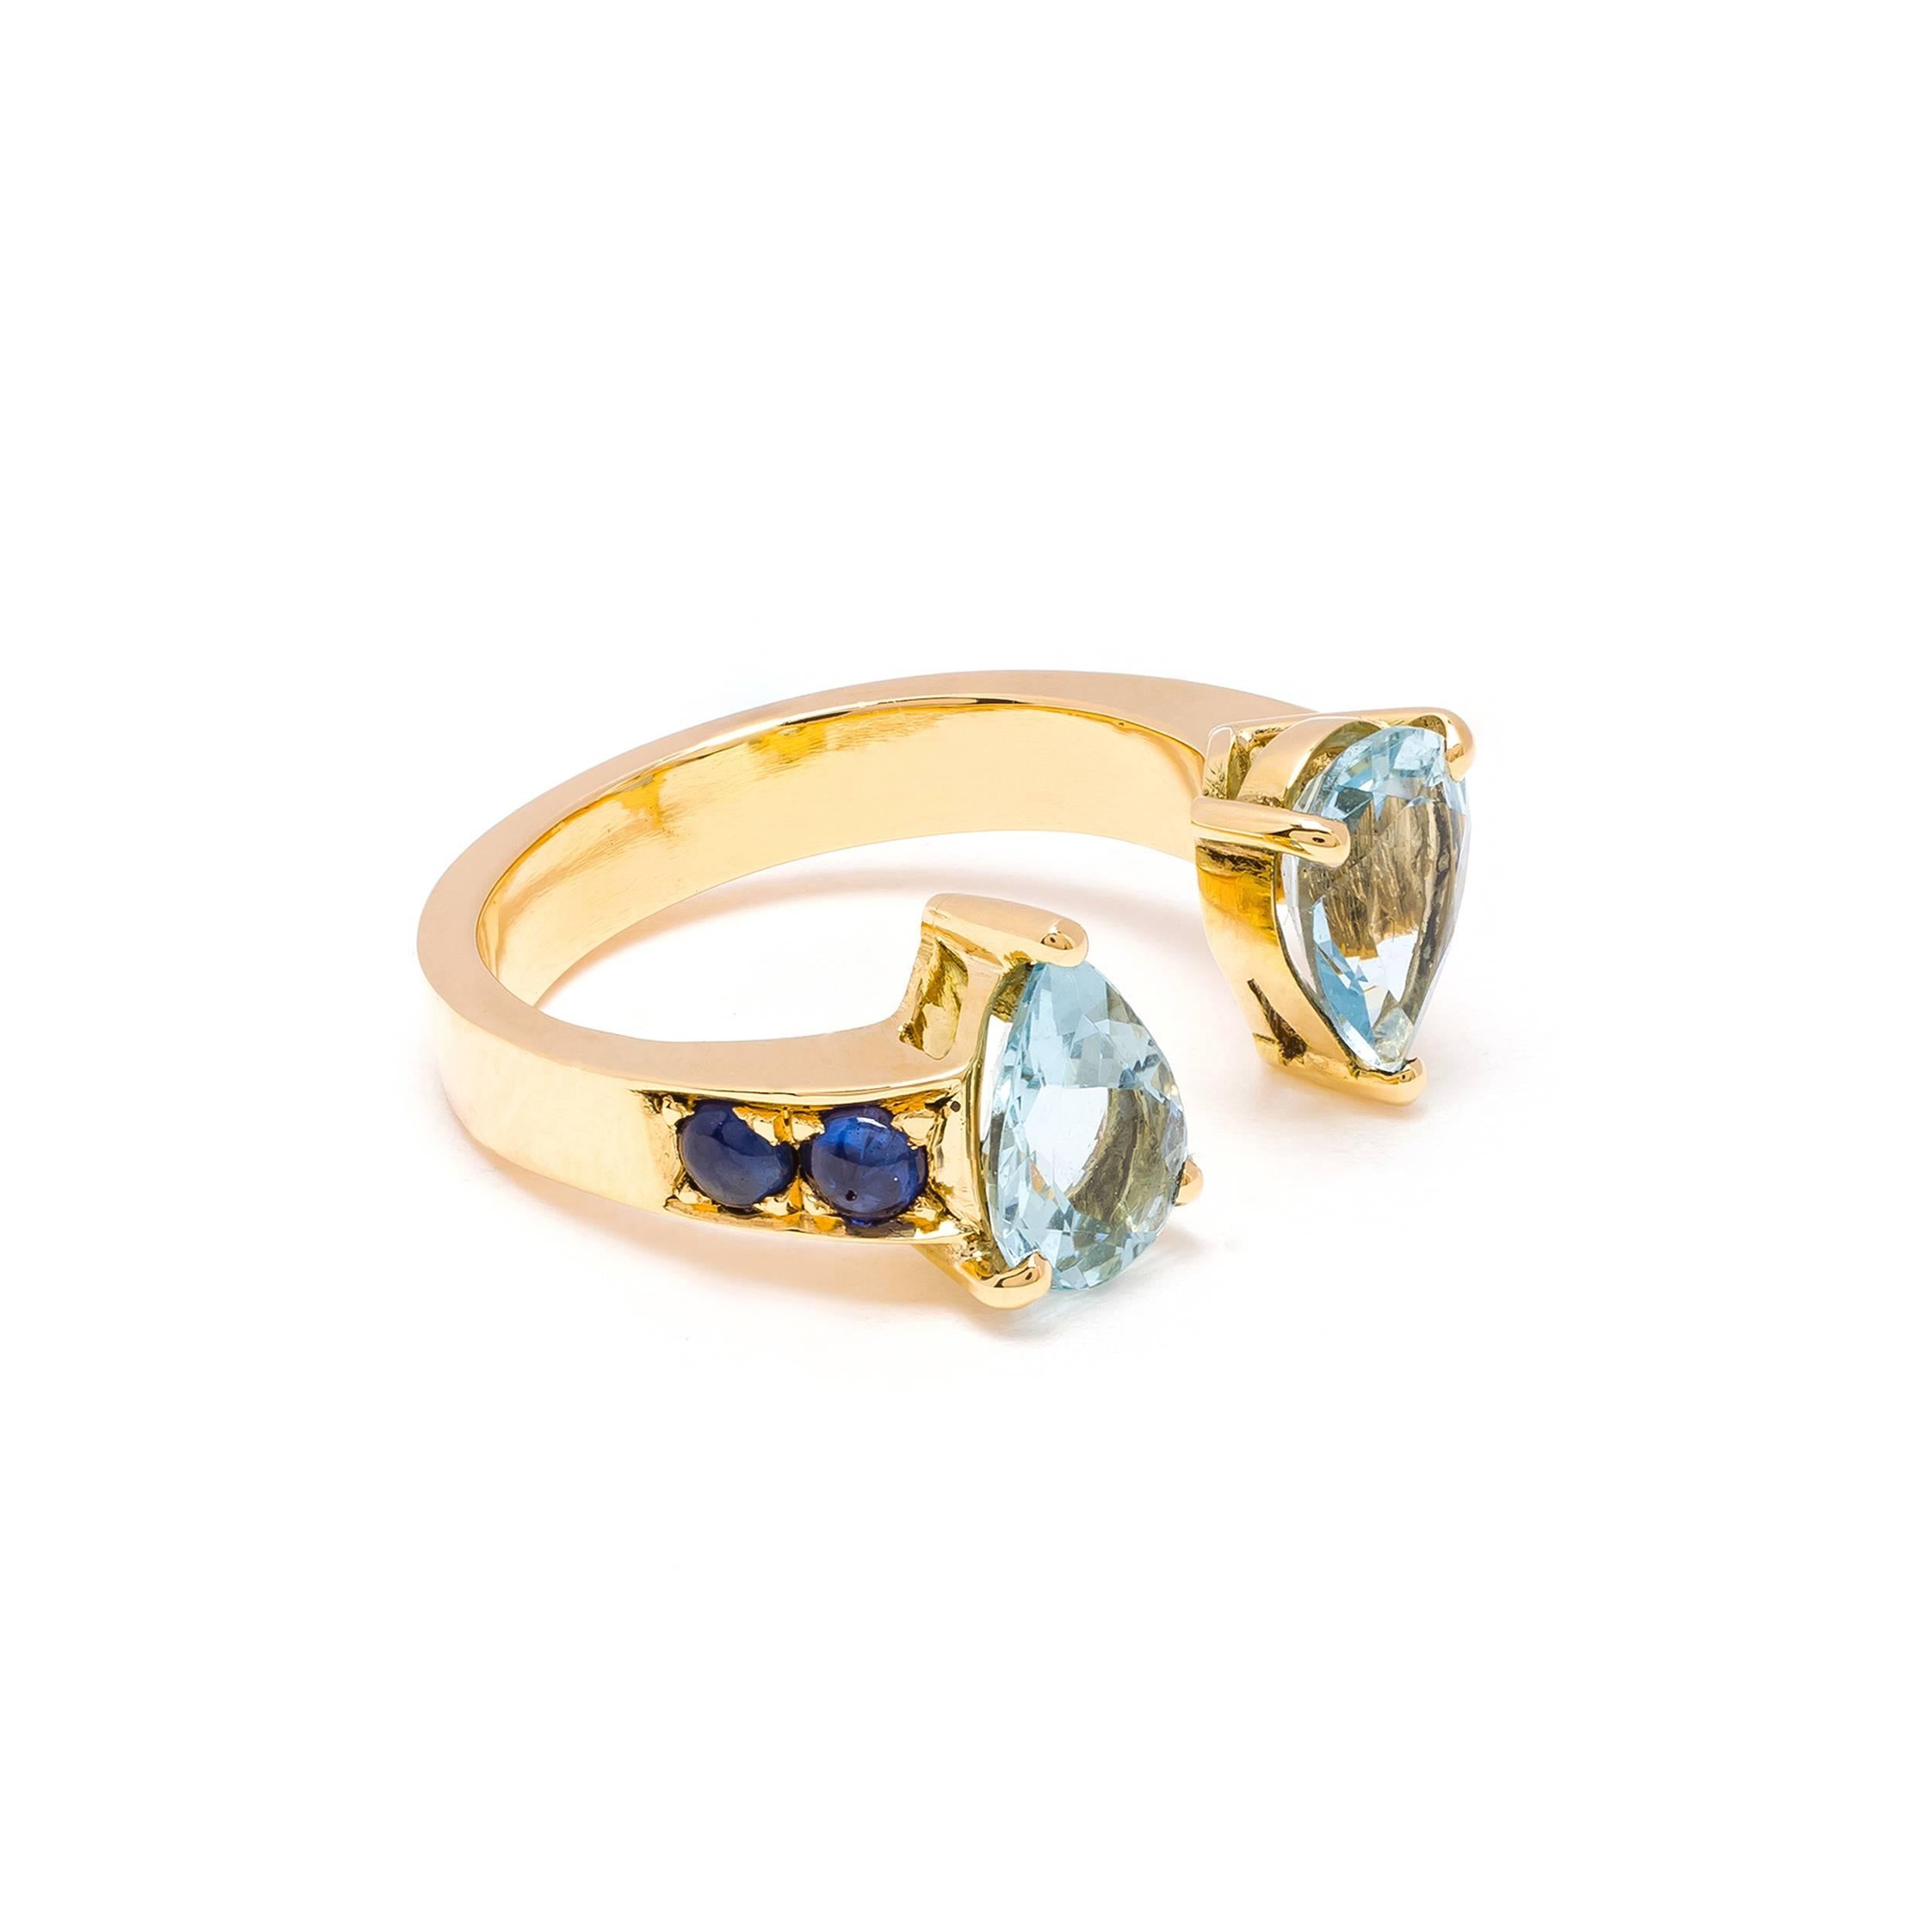 This DUBINI ring from the 'Theodora' collection features aquamarine drops with blue sapphire cabochons set in 18K yellow gold. 

Ring sizes available: 52 (US 6)

The ring may be ordered in any size with a lead time of 3-4 weeks.

Please note that we